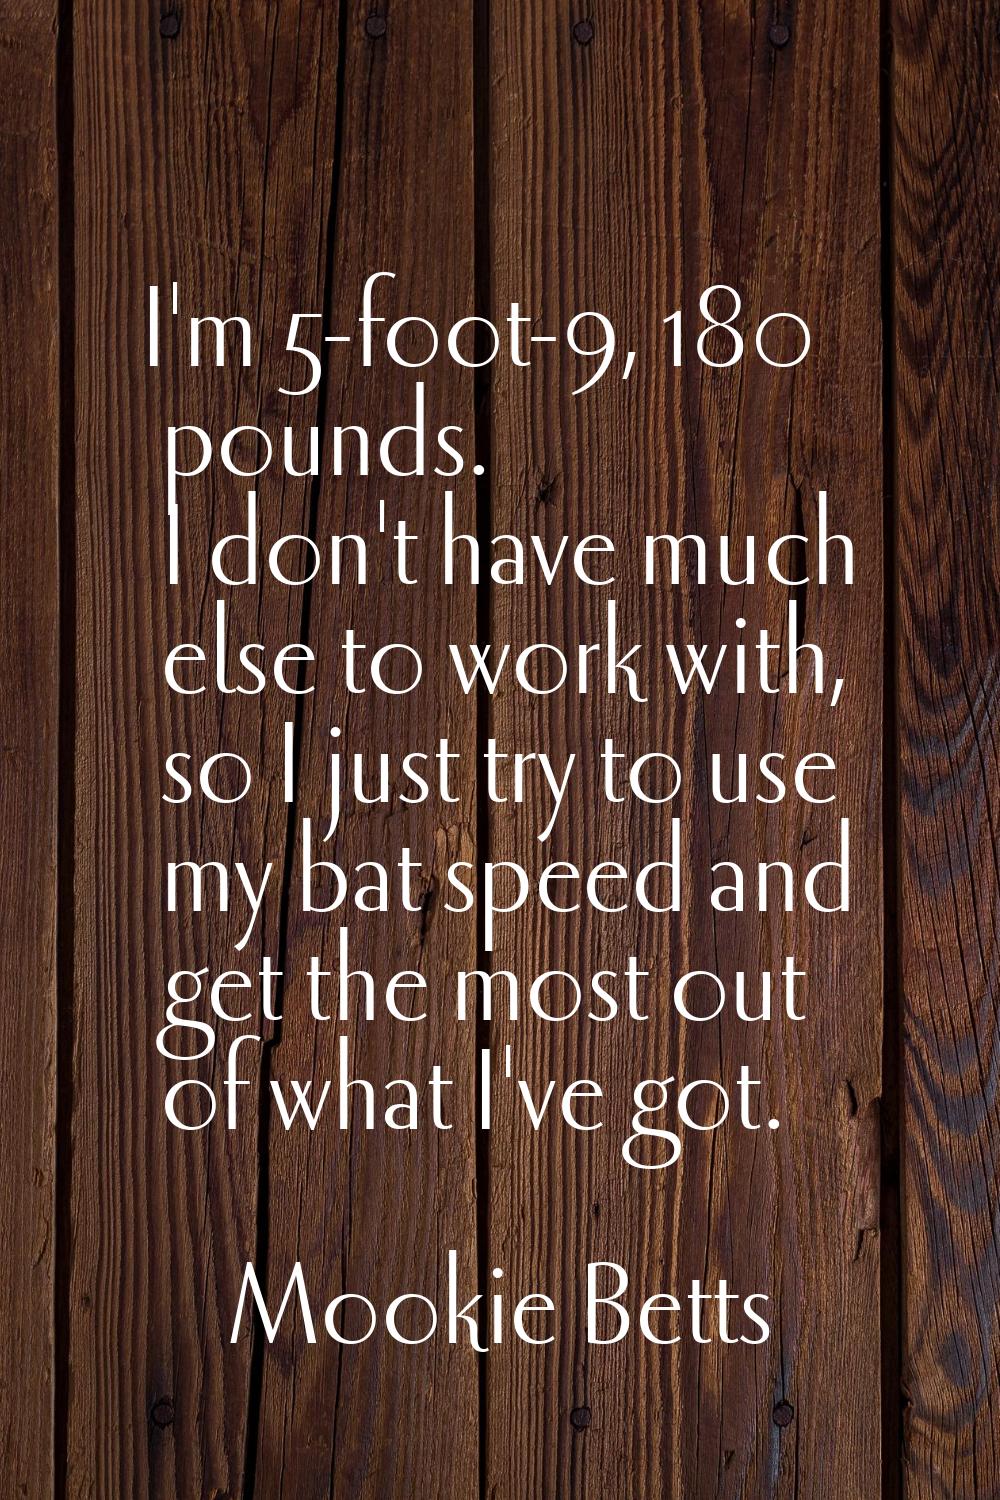 I'm 5-foot-9, 180 pounds. I don't have much else to work with, so I just try to use my bat speed an